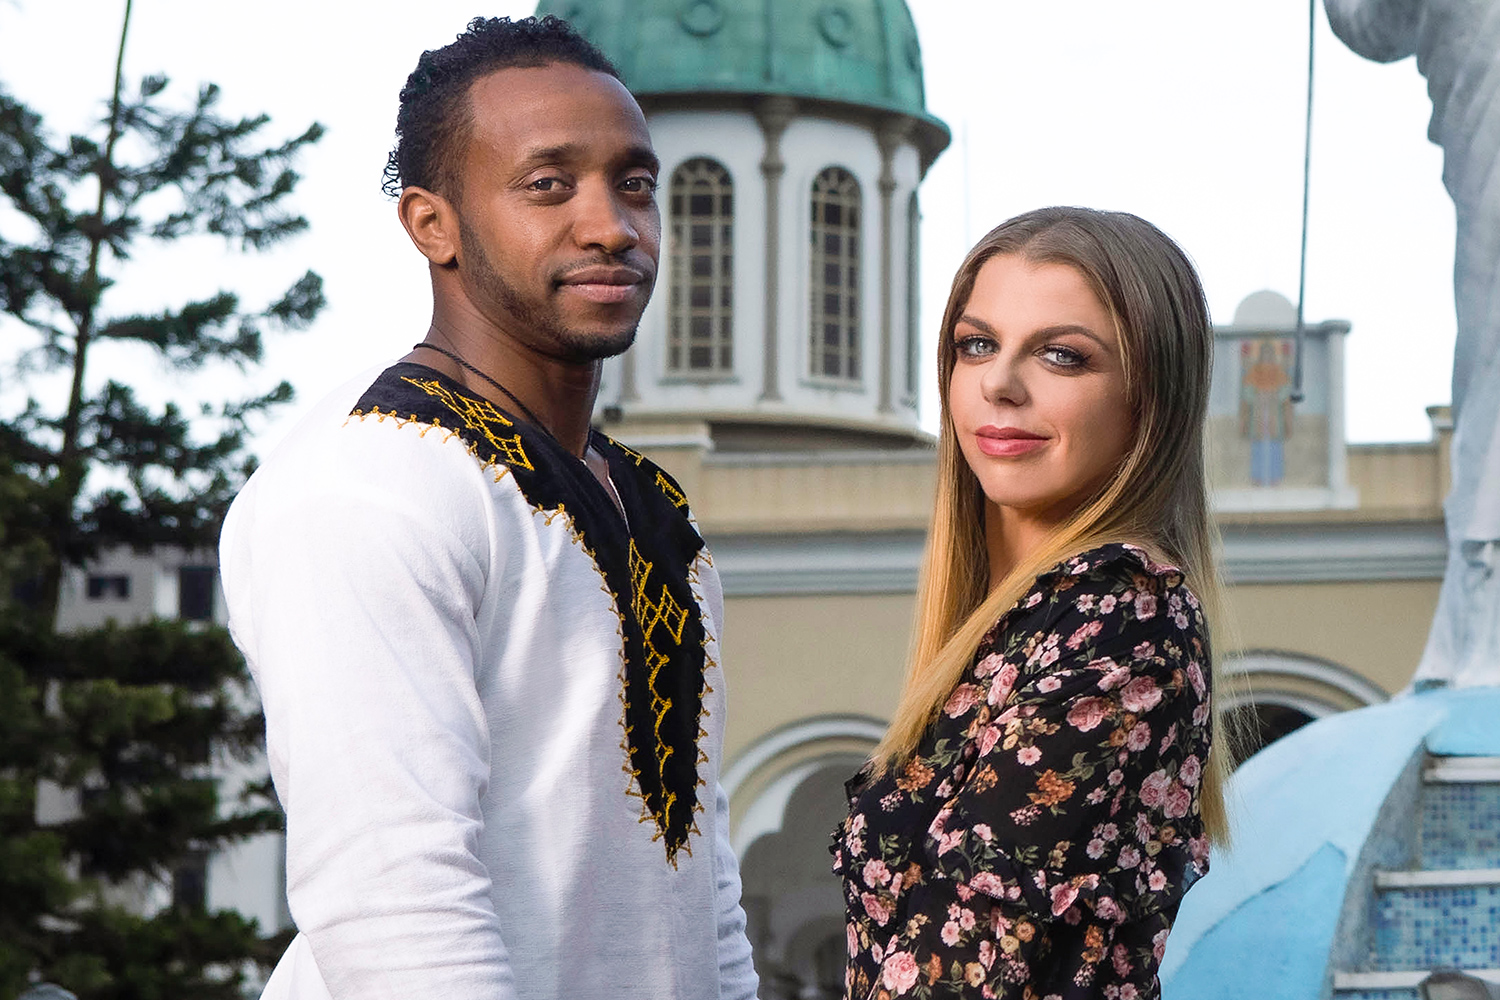 Ari And Bini pose for photos in the street in Addis Ababa, for 90 Day Fiancé: The Other Way on May 11, 2021.